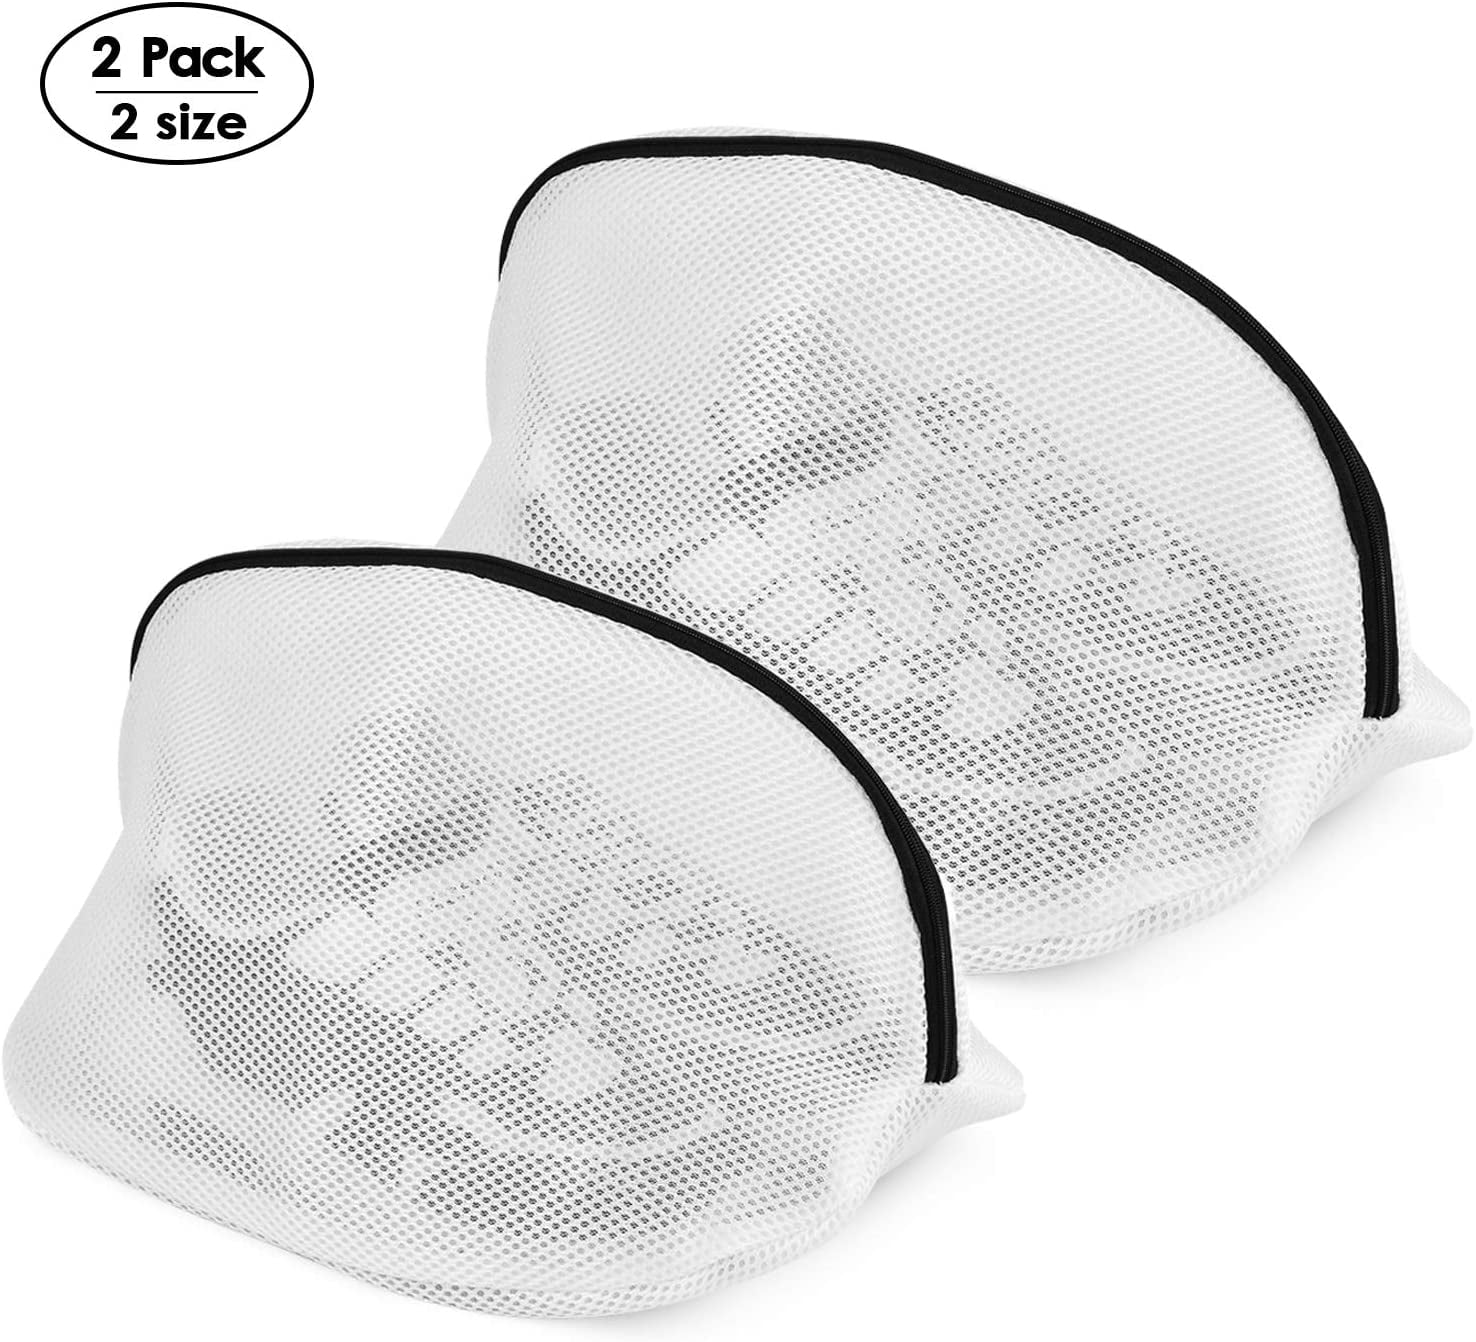 Mesh Shoes Laundry Bag  Spin Store